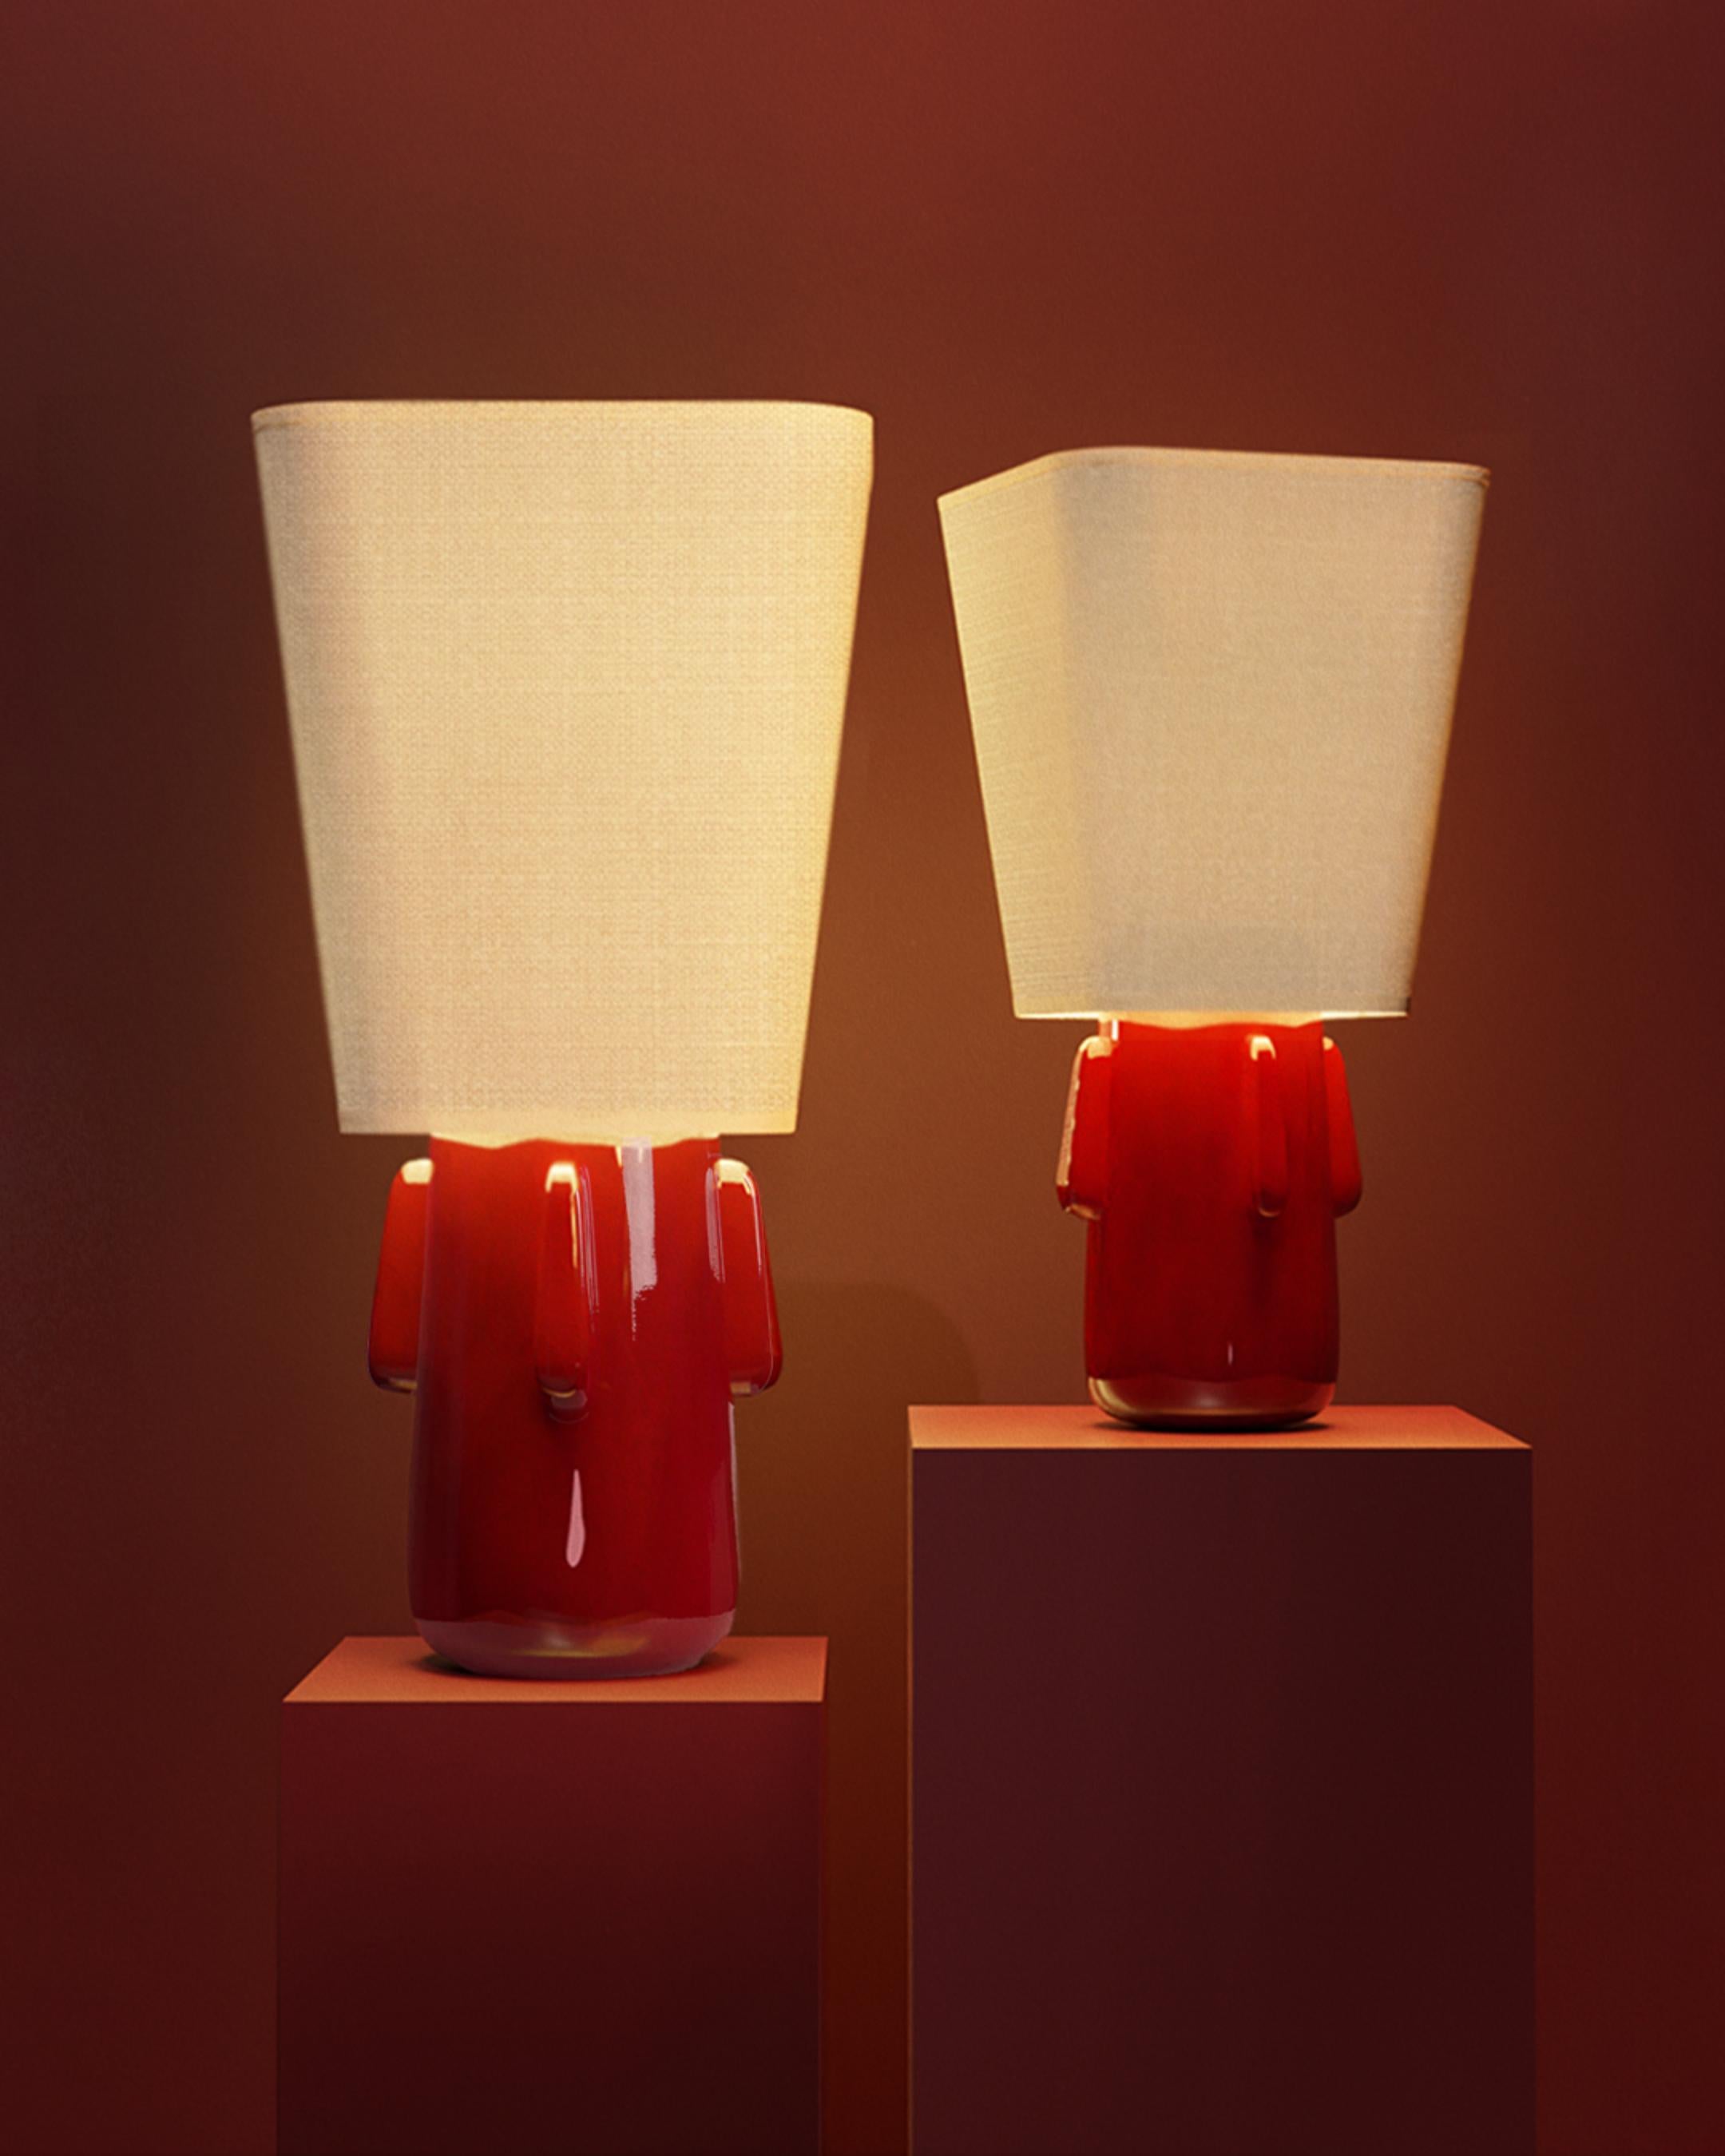 Mini Toshi Table Lamp by Kira Design
Dimensions: ⌀ 28 x H 55 cm
Materials: Ceramic, Linen.
Available Blue, Red, Green, Black, Yellow

The MINI TOSHI table lamp is the little sister of our iconic Toshiro lamp. 

With its size of 55cm and diameter of